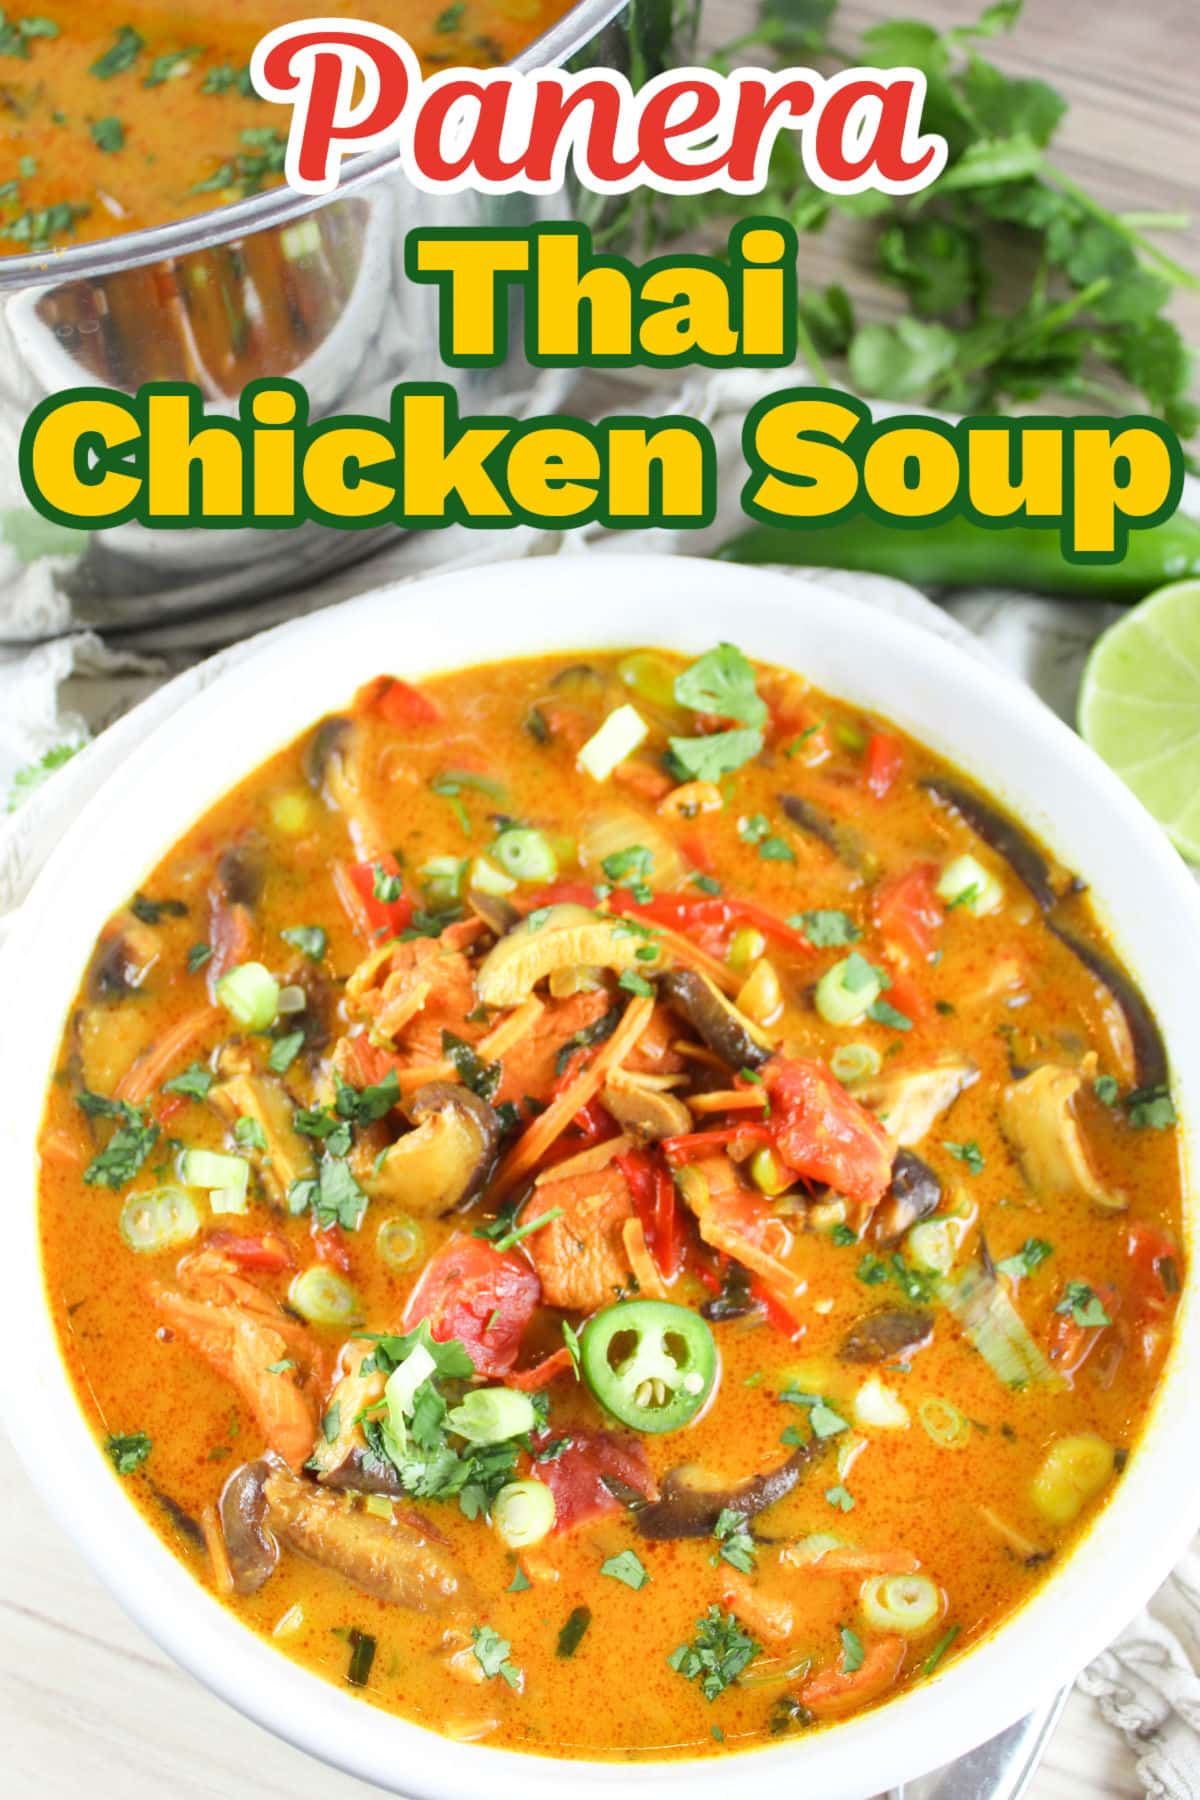 This Panera Bread Thai Chicken Soup copycat recipe is the perfect soup for the cold weather! It's a delicious mix of flavors full of chicken, carrots, shiitake mushrooms, red bell peppers and edamame simmered in a rich, Thai yellow curry spicy-sweet coconut broth. Plus - it's a little spicy - so it clears the sinuses too!
 via @foodhussy